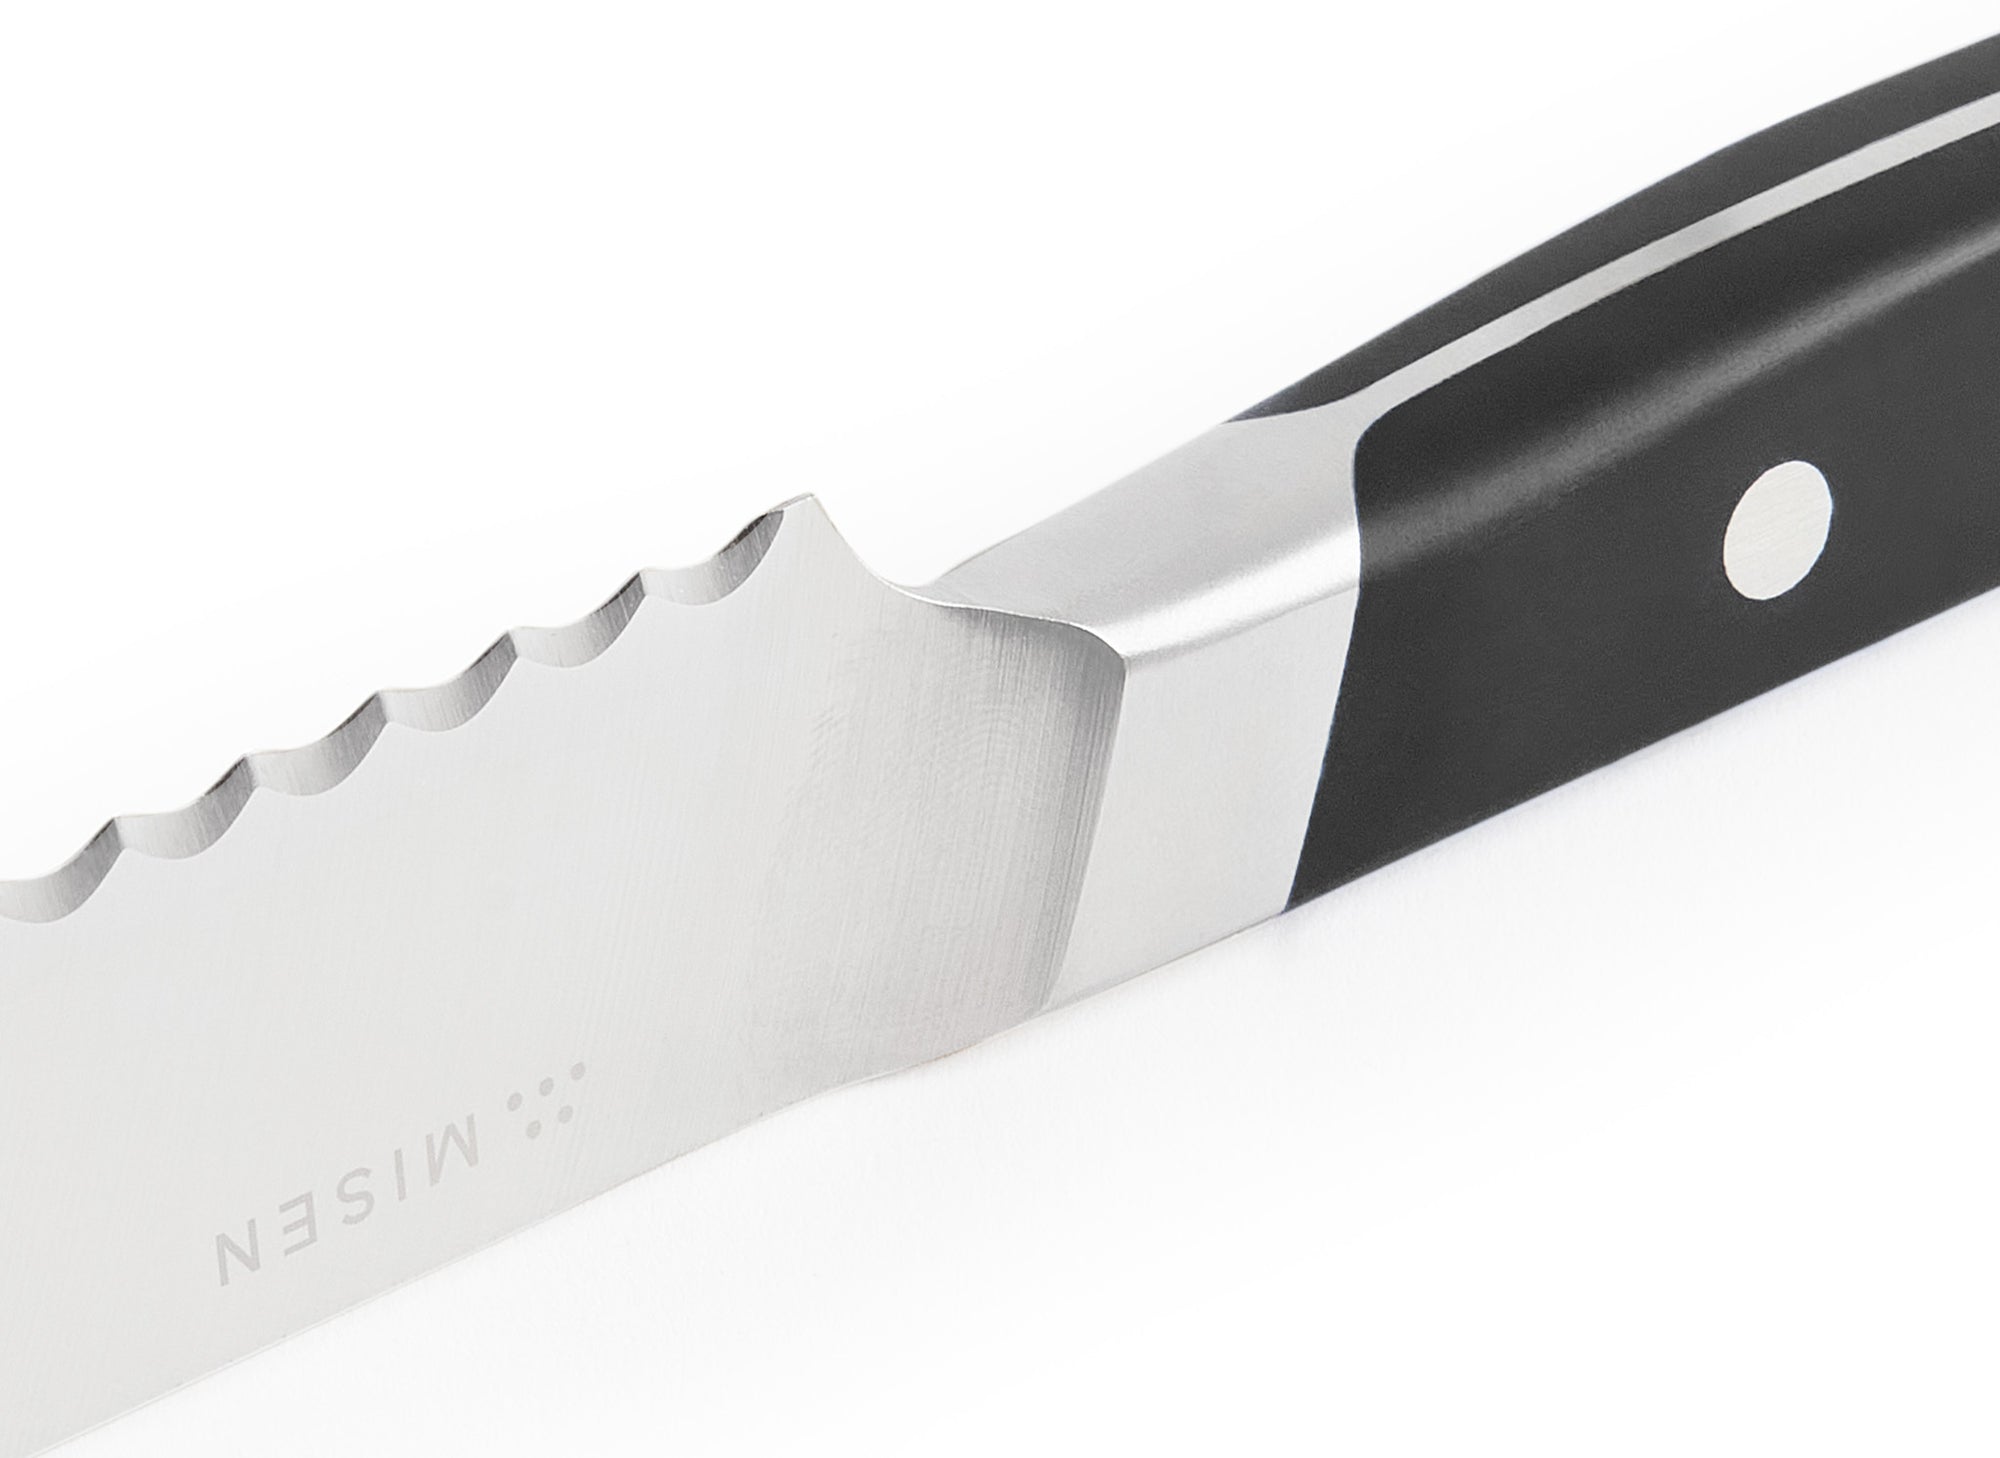 A close-up shot of the black Misen Short Serrated Knife on a white background, with a clear view of the blade serrations and sloped bolster. The blade is facing up and toward the viewer.